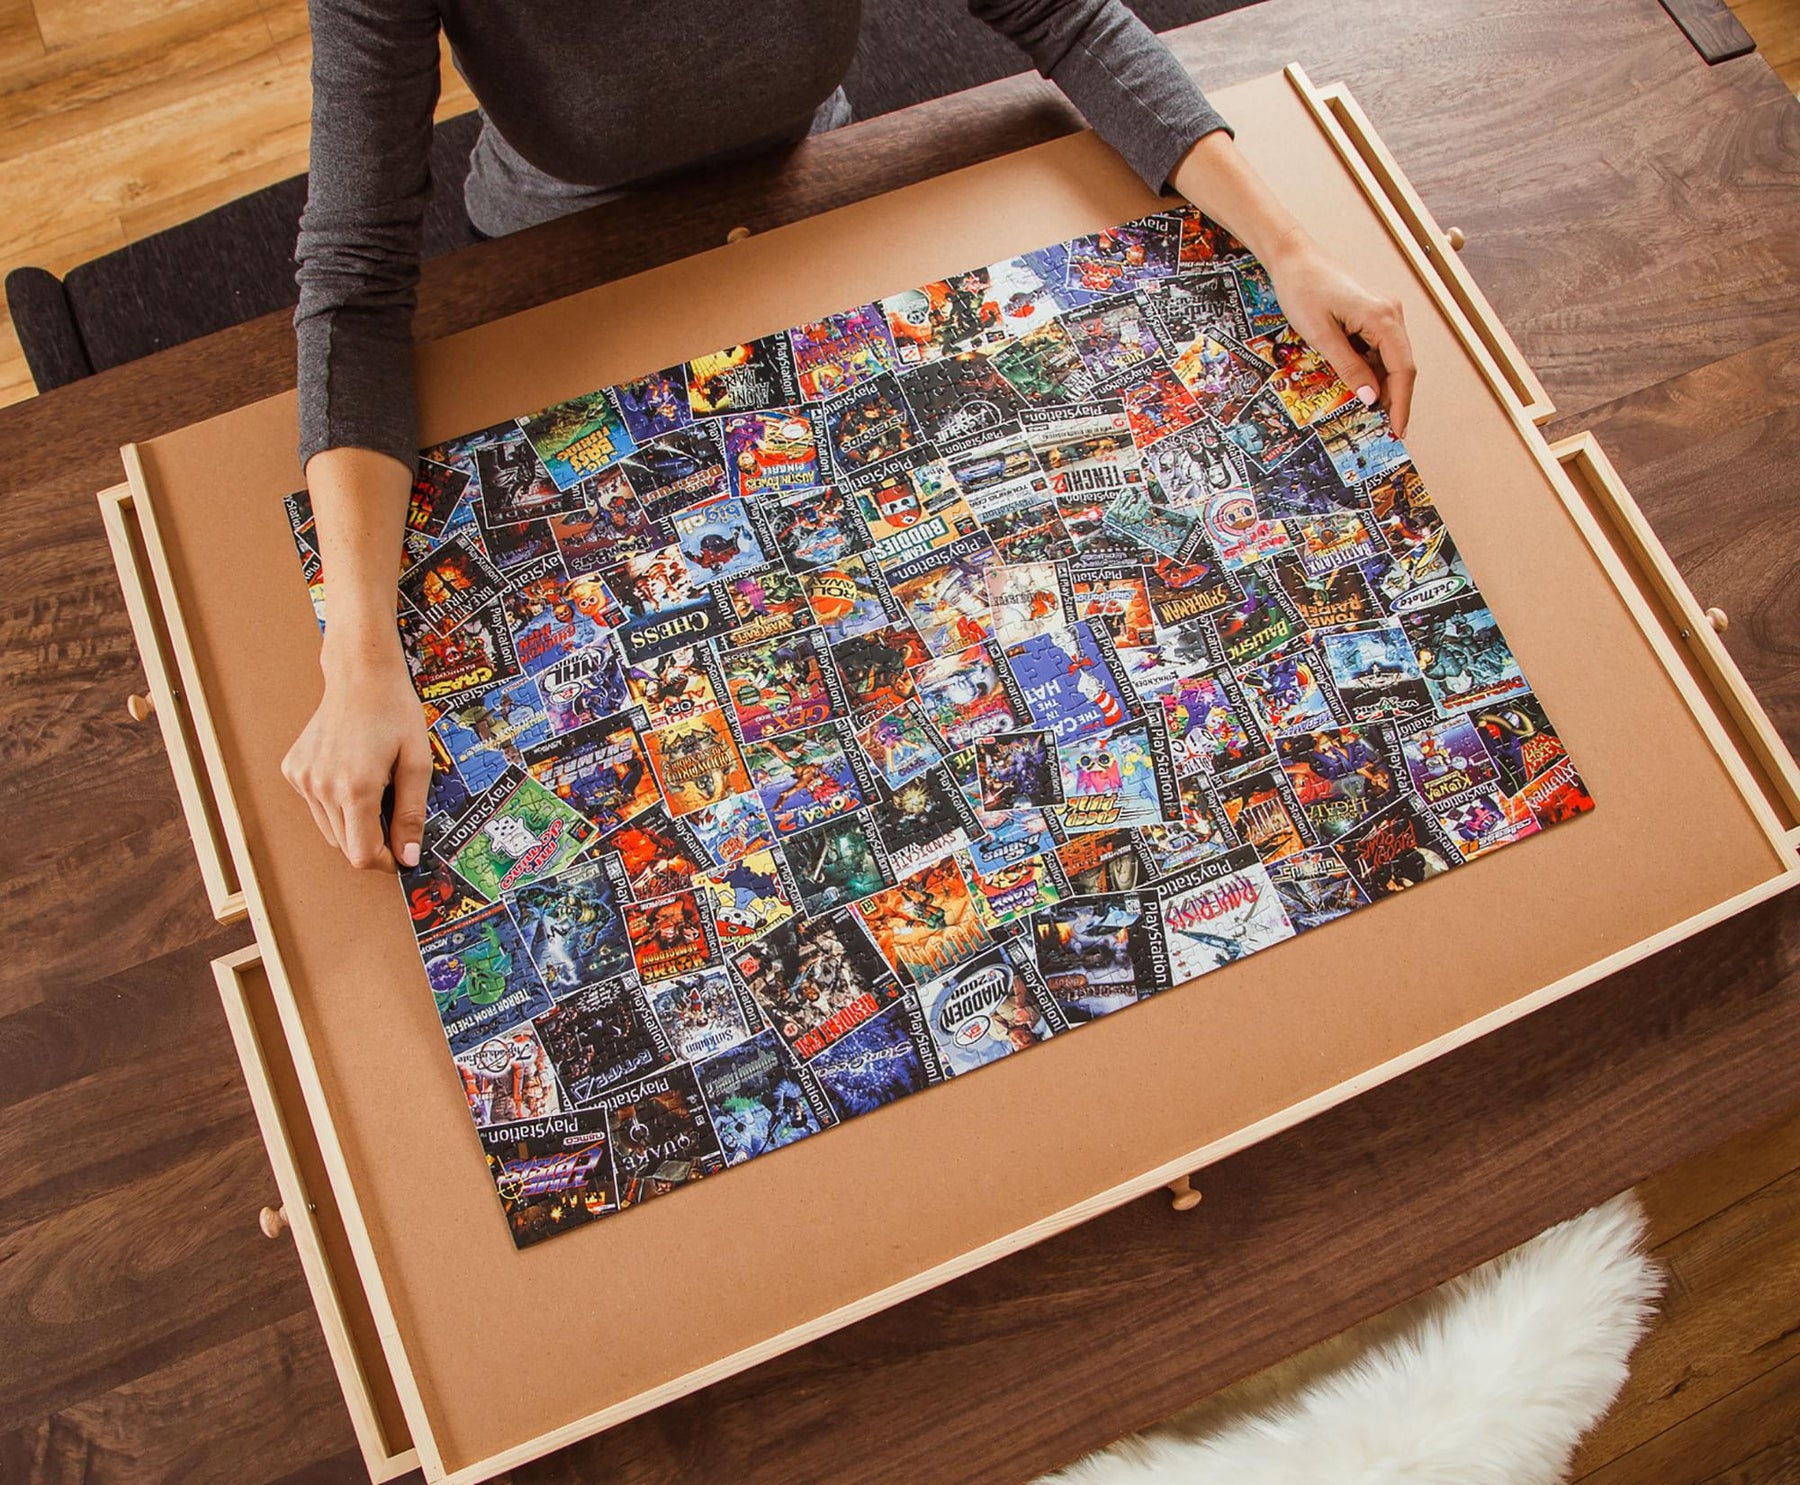 PlayStation Video Game Box Collage 1000-Piece Jigsaw Puzzle